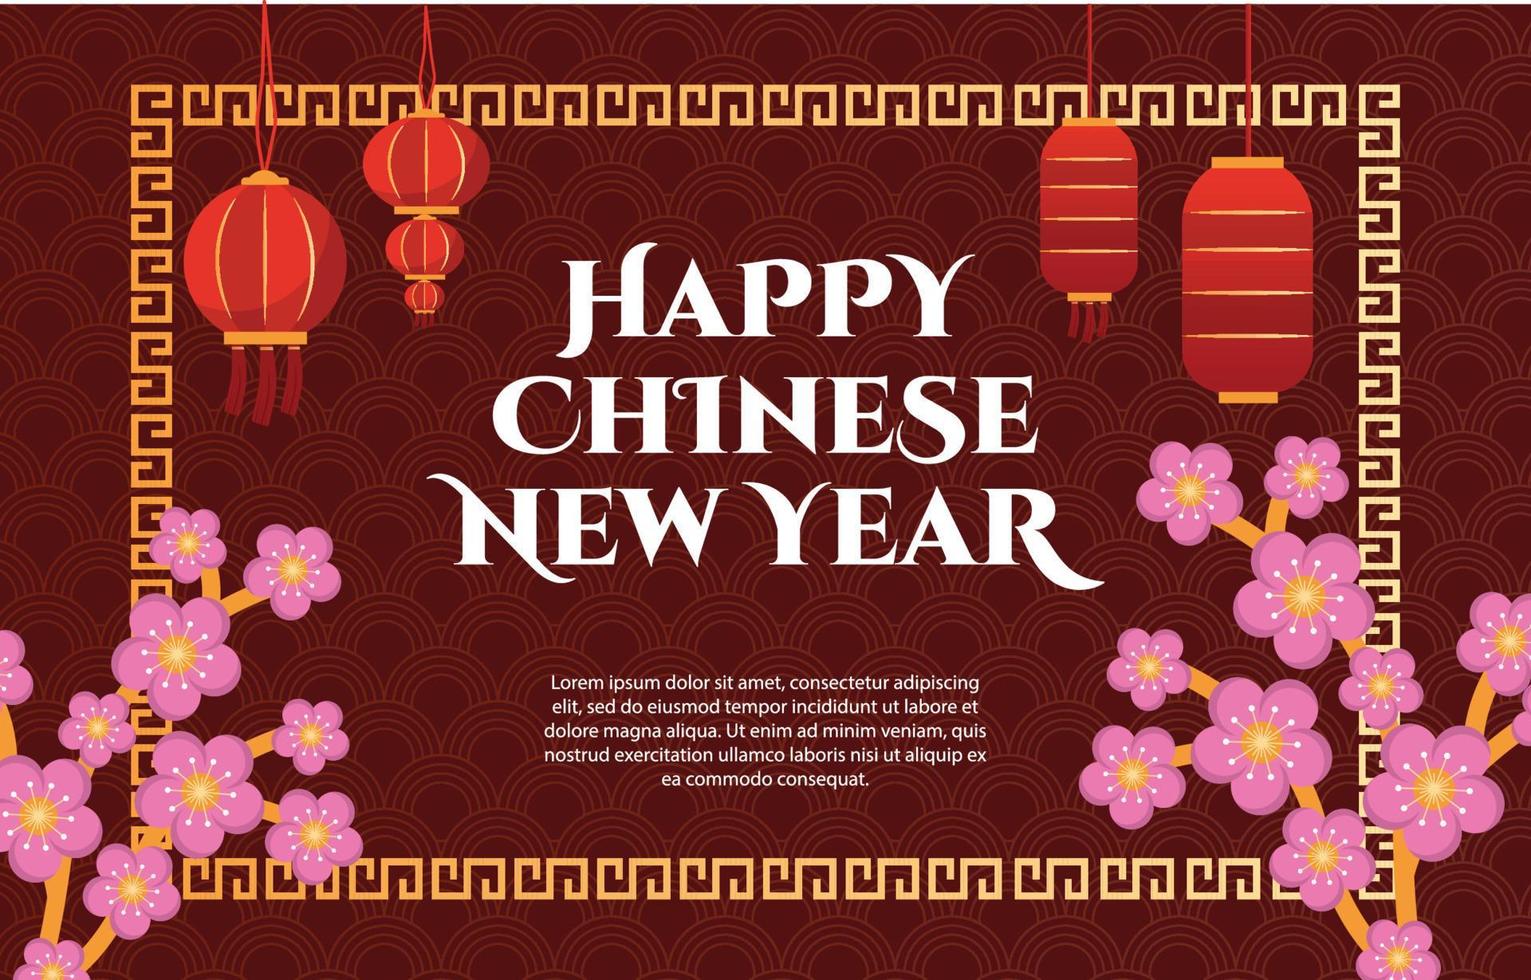 Lantern Flower Happy China Chinese New Year Celebration Red Greeting Card vector